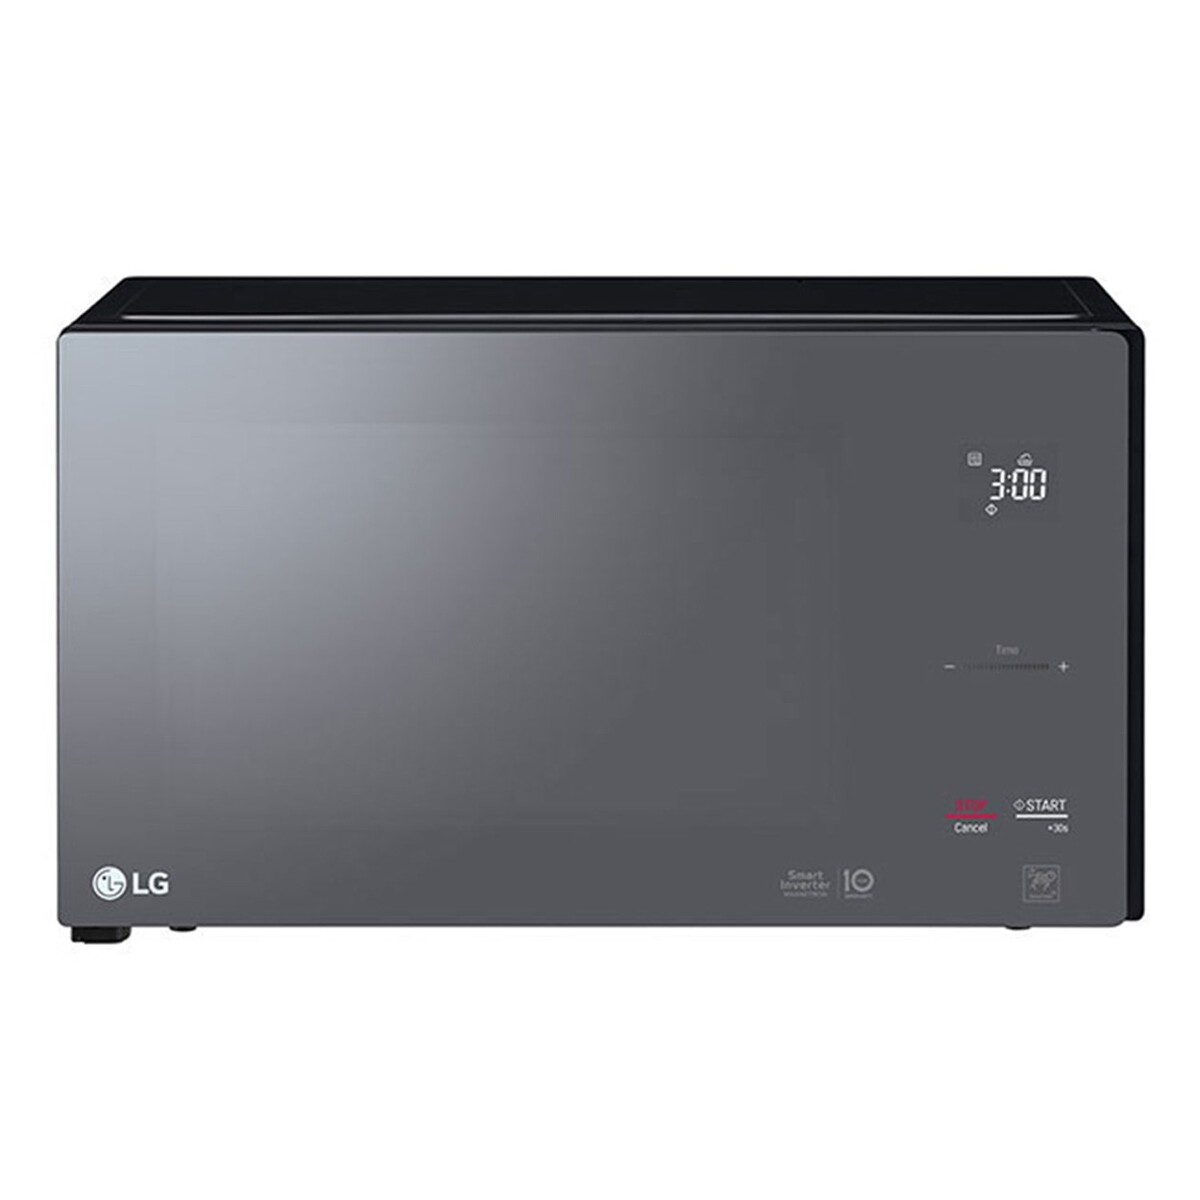 LG Inverter Solo Microwave Oven MS4295DIS 42 Litre